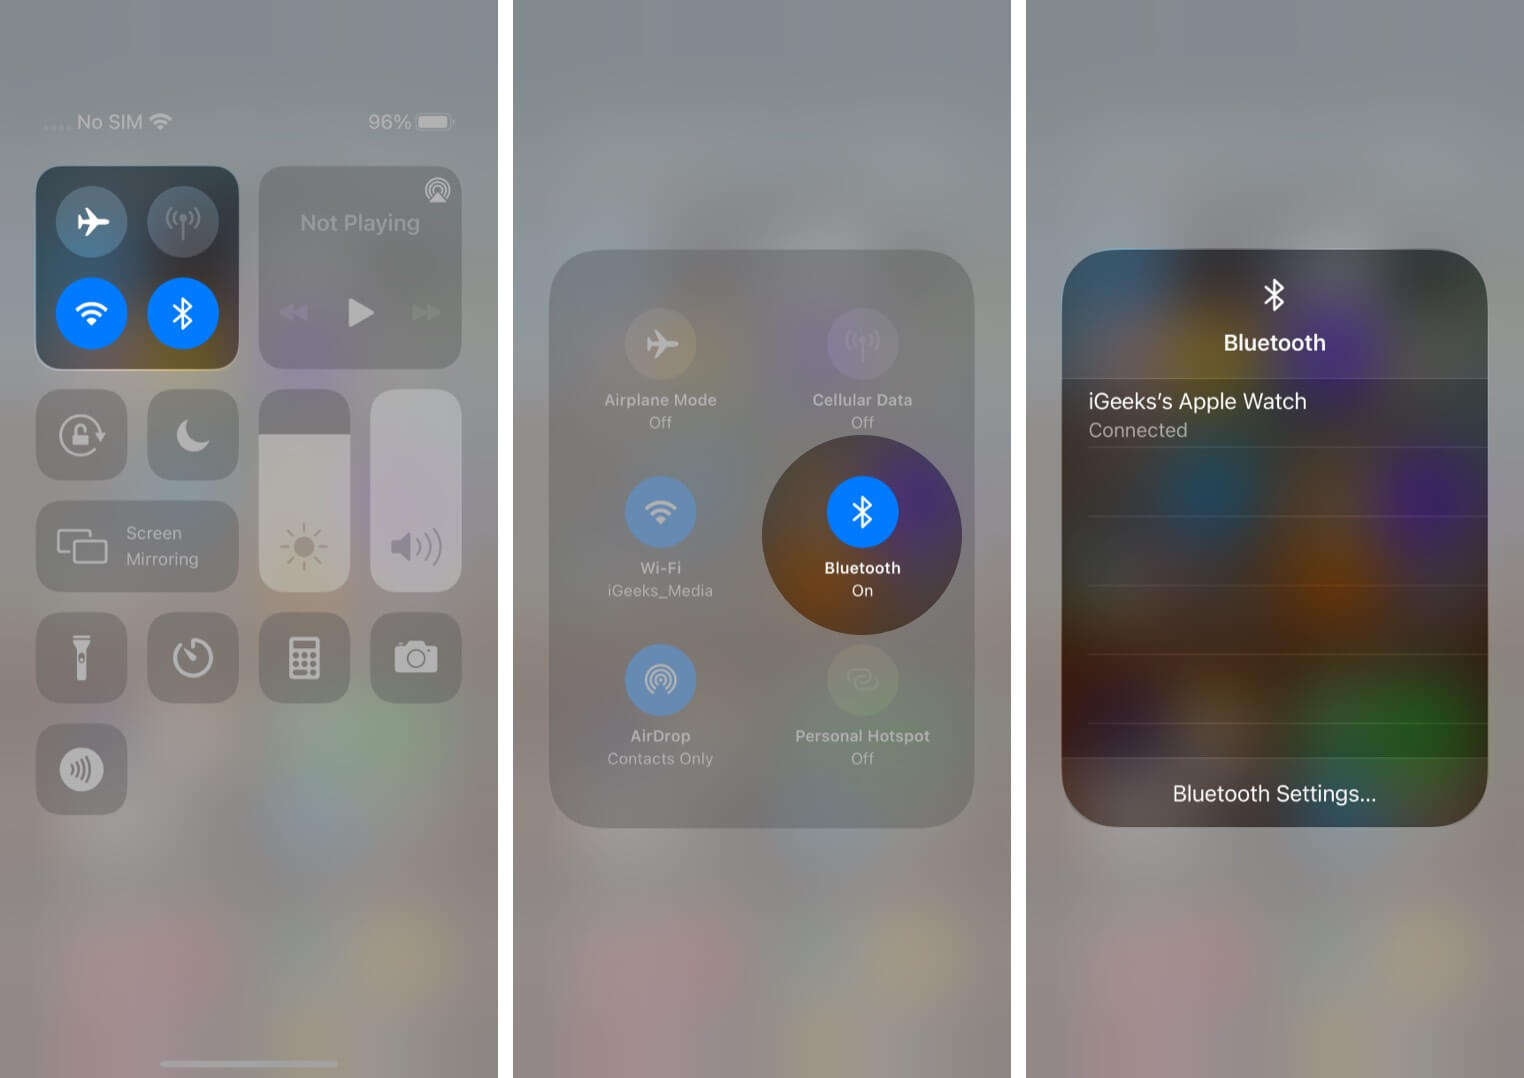 Connect to Bluetooth Device from Control Center on iPhone